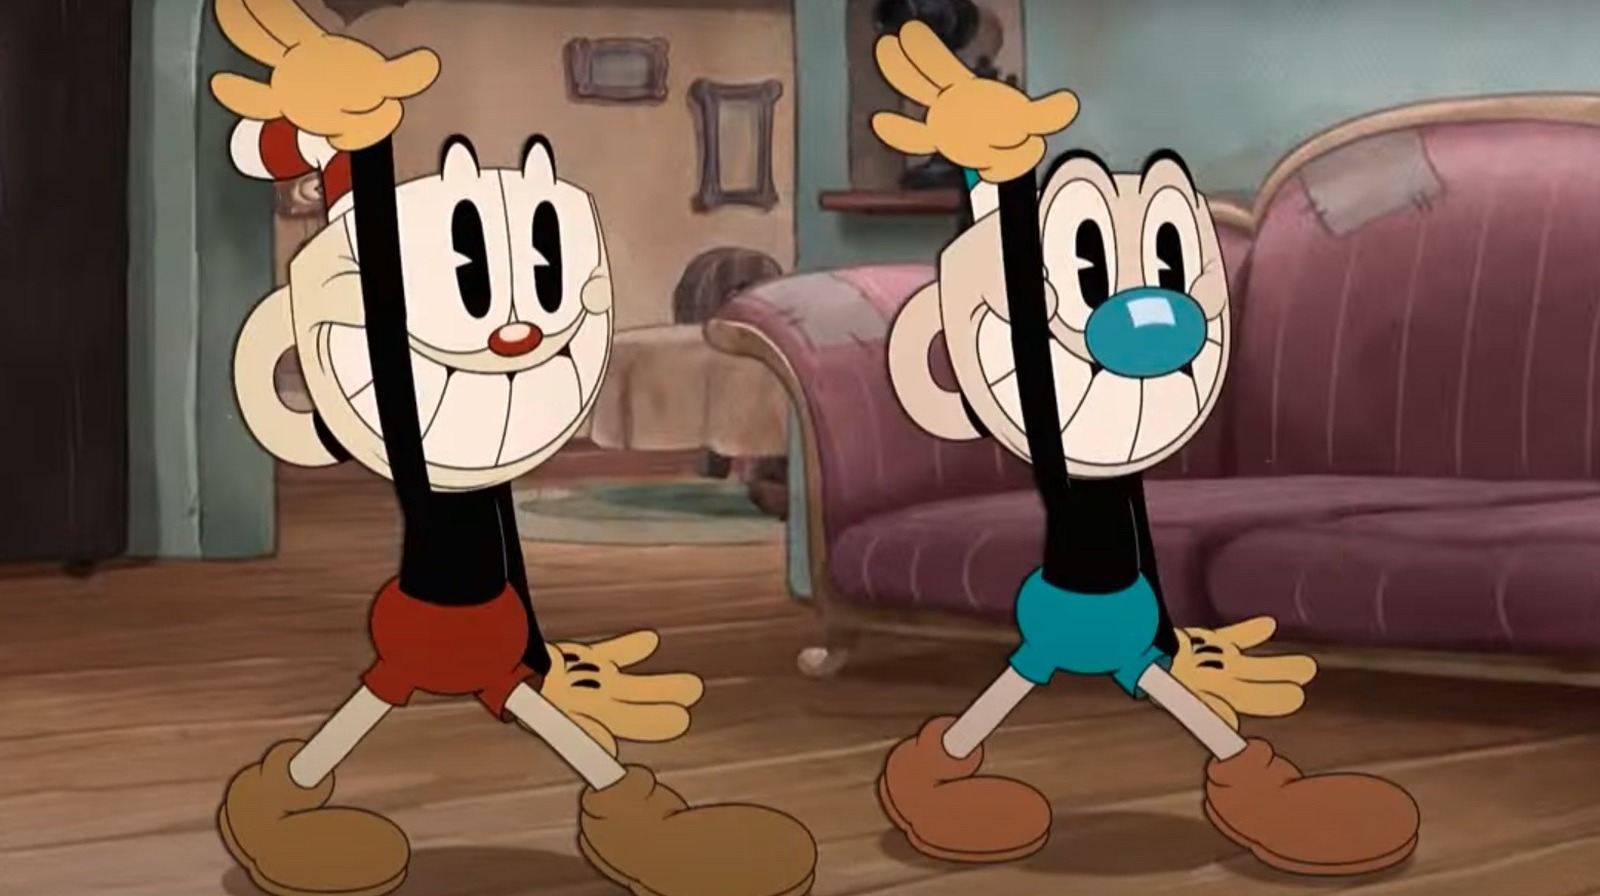 The Cuphead Show season 2 coming in August 2022